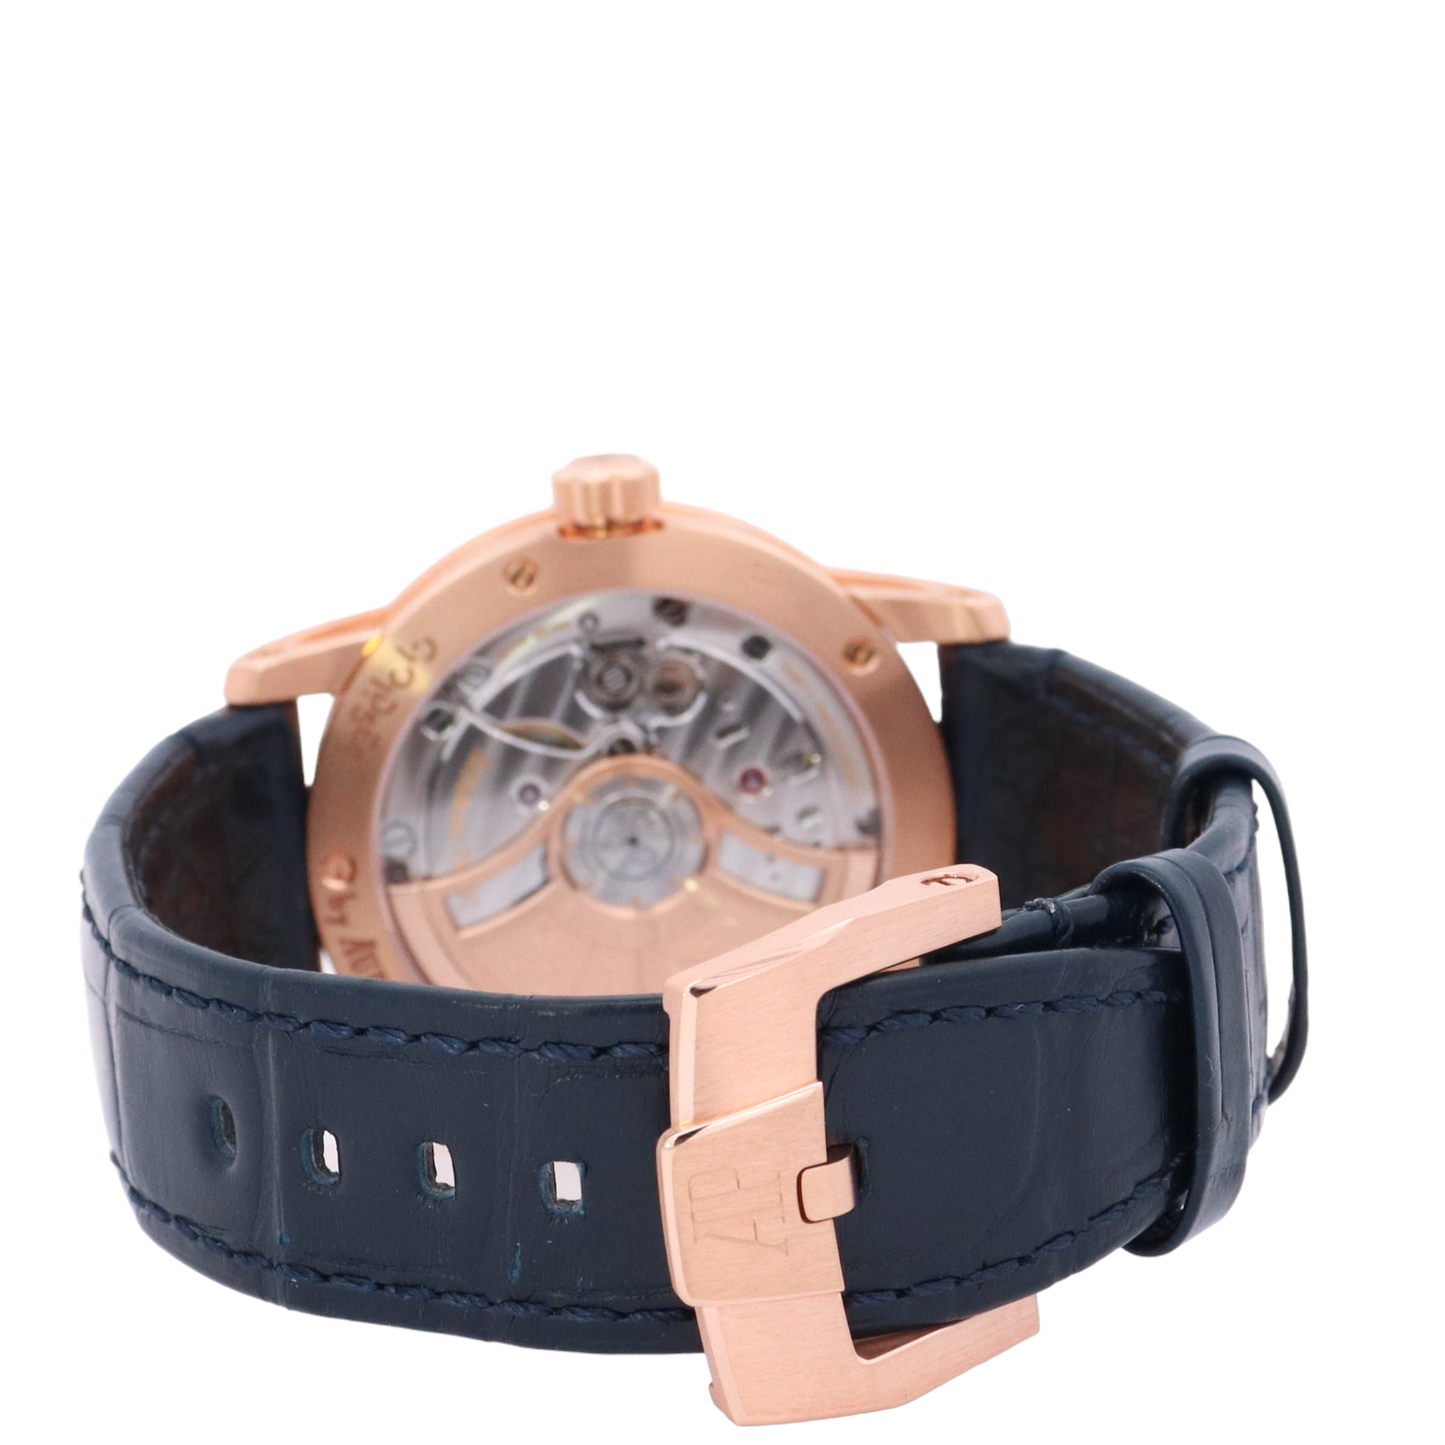 Audemars Piguet Code 11.59 41mm Rose Gold Smoked Lacquered Blue Dial Watch Reference# 15210OR.OO.A028CR.01 - Happy Jewelers Fine Jewelry Lifetime Warranty